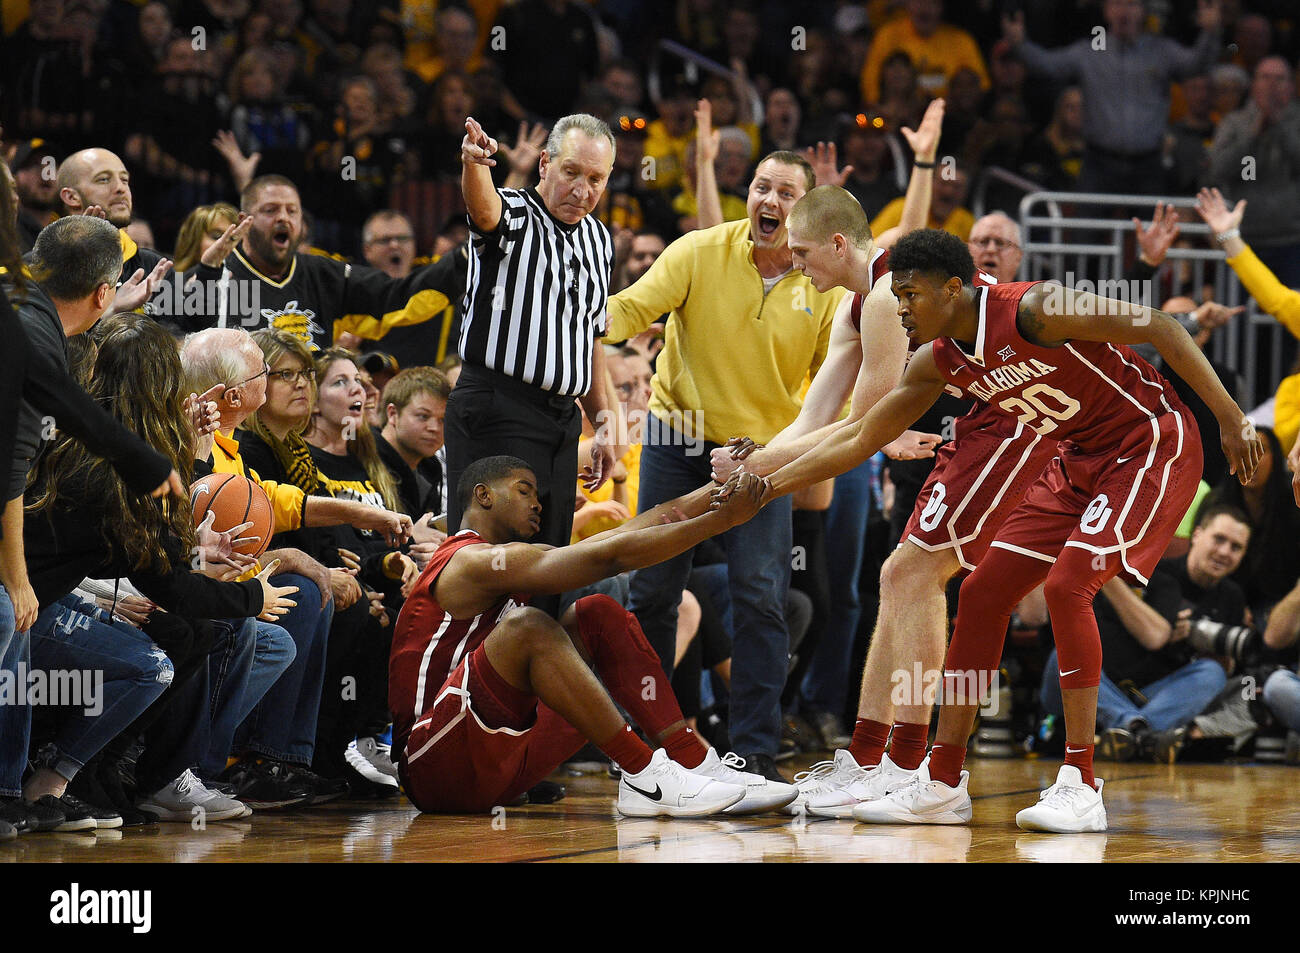 The Arena. 16th Dec, 2017. A Shocker fan comes down the sideline questioning an official's call that was in favor of the Sooners during the NCAA Basketball Game between the Oklahoma Sooners and the Wichita State Shockers at Intrust Bank Arena in Wichita, Kansas. The fan was quickly escorted out of the arena. Kendall Shaw/CSM/Alamy Live News Stock Photo